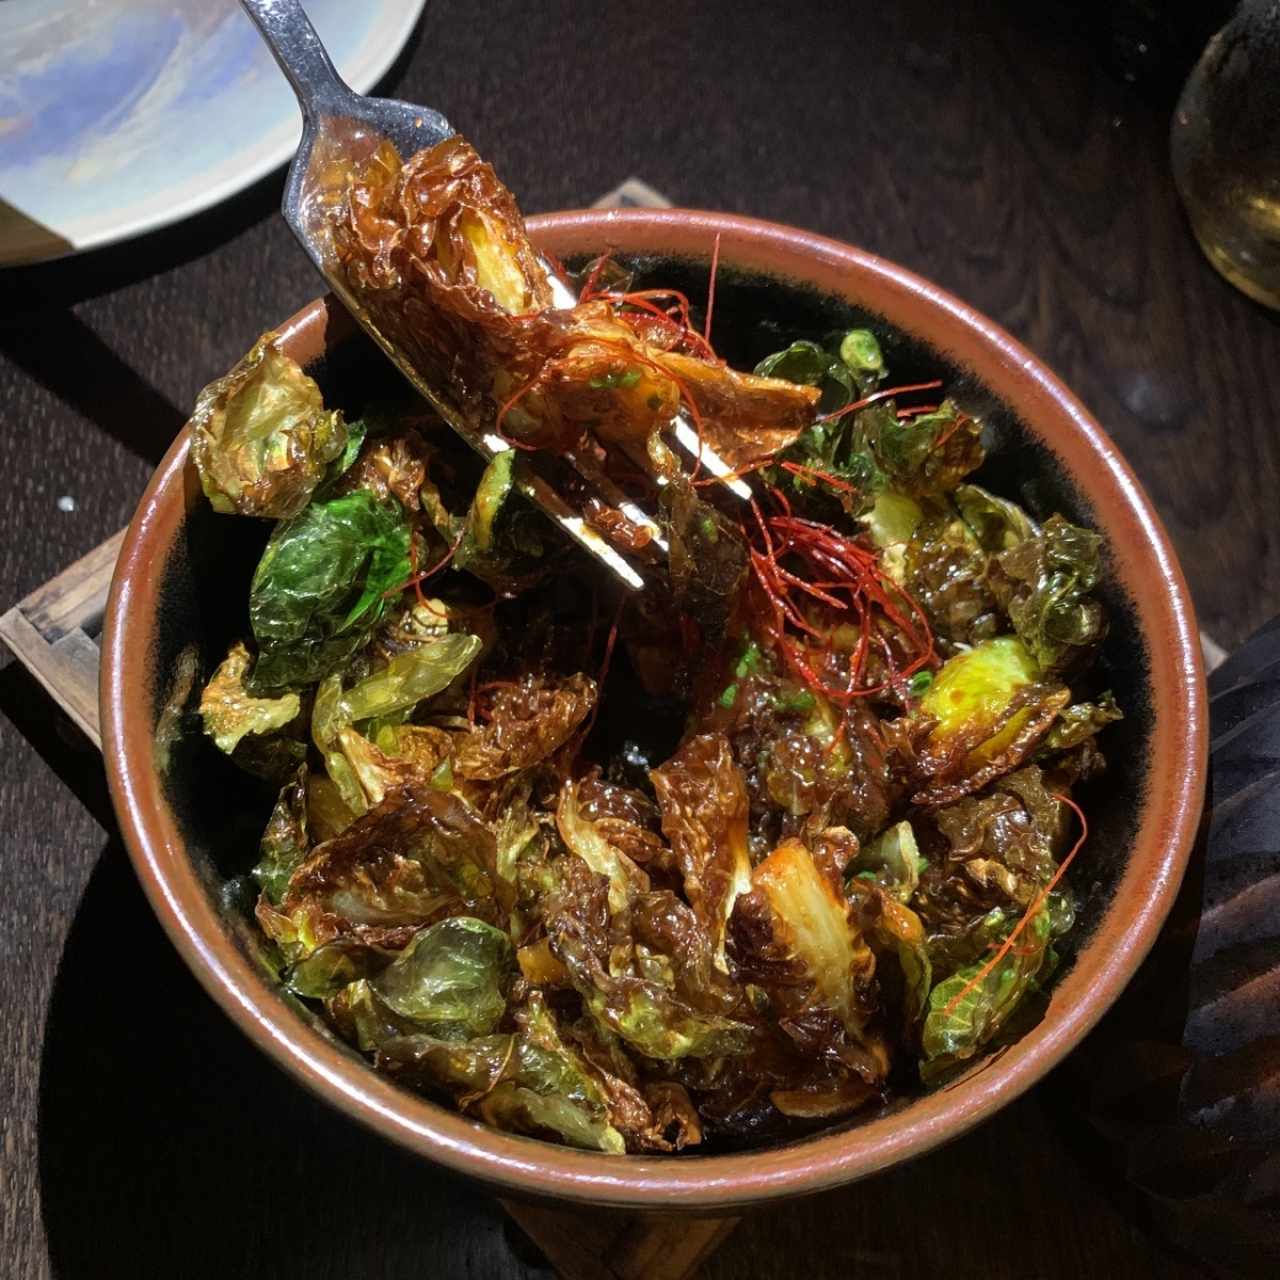 HOT - CRISPY BRUSSELS SPROUTS